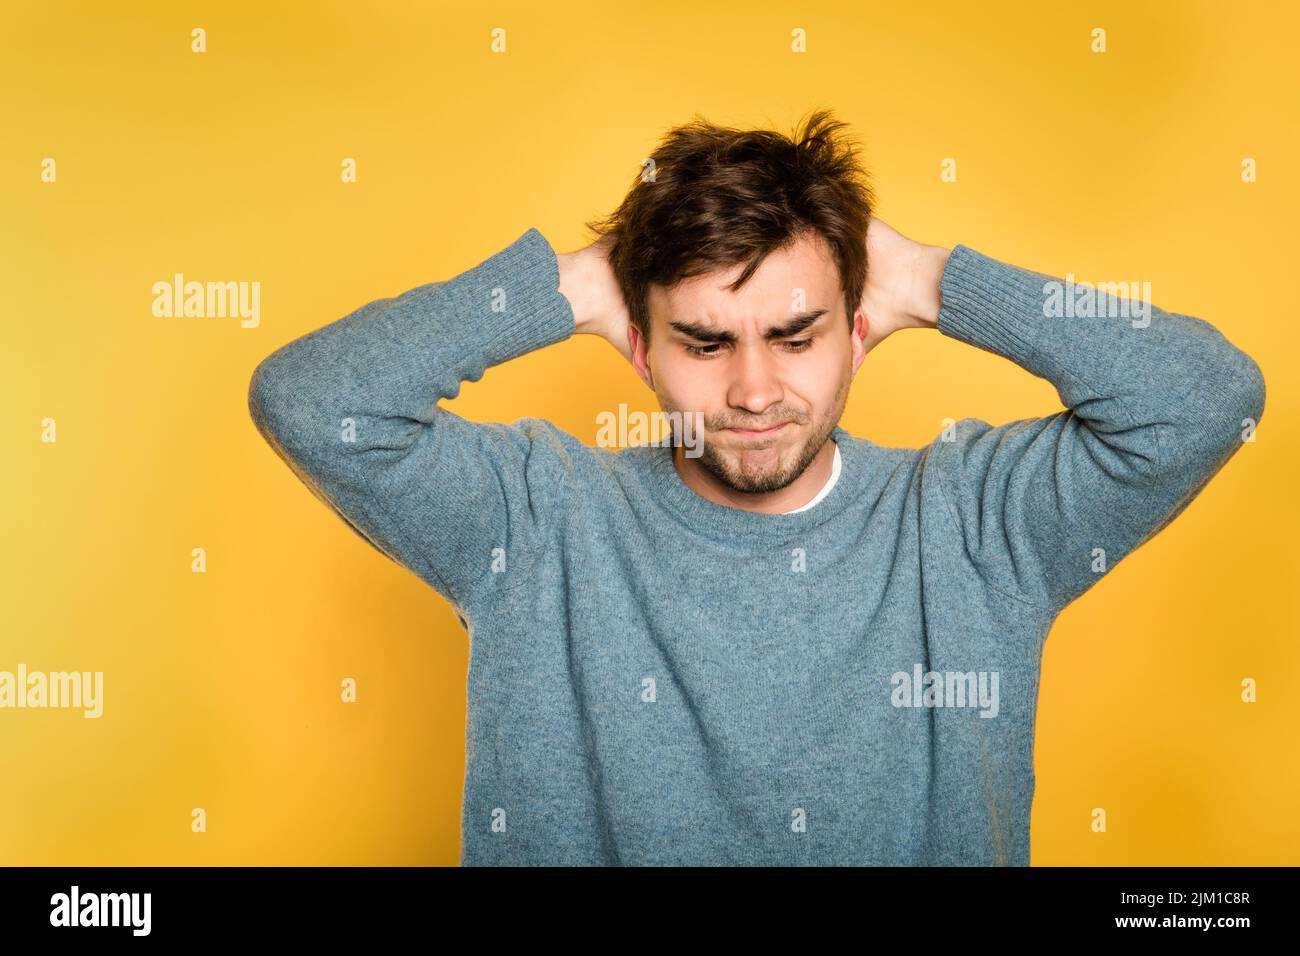 annoyed discontent frustrated disgruntled man Stock Photo